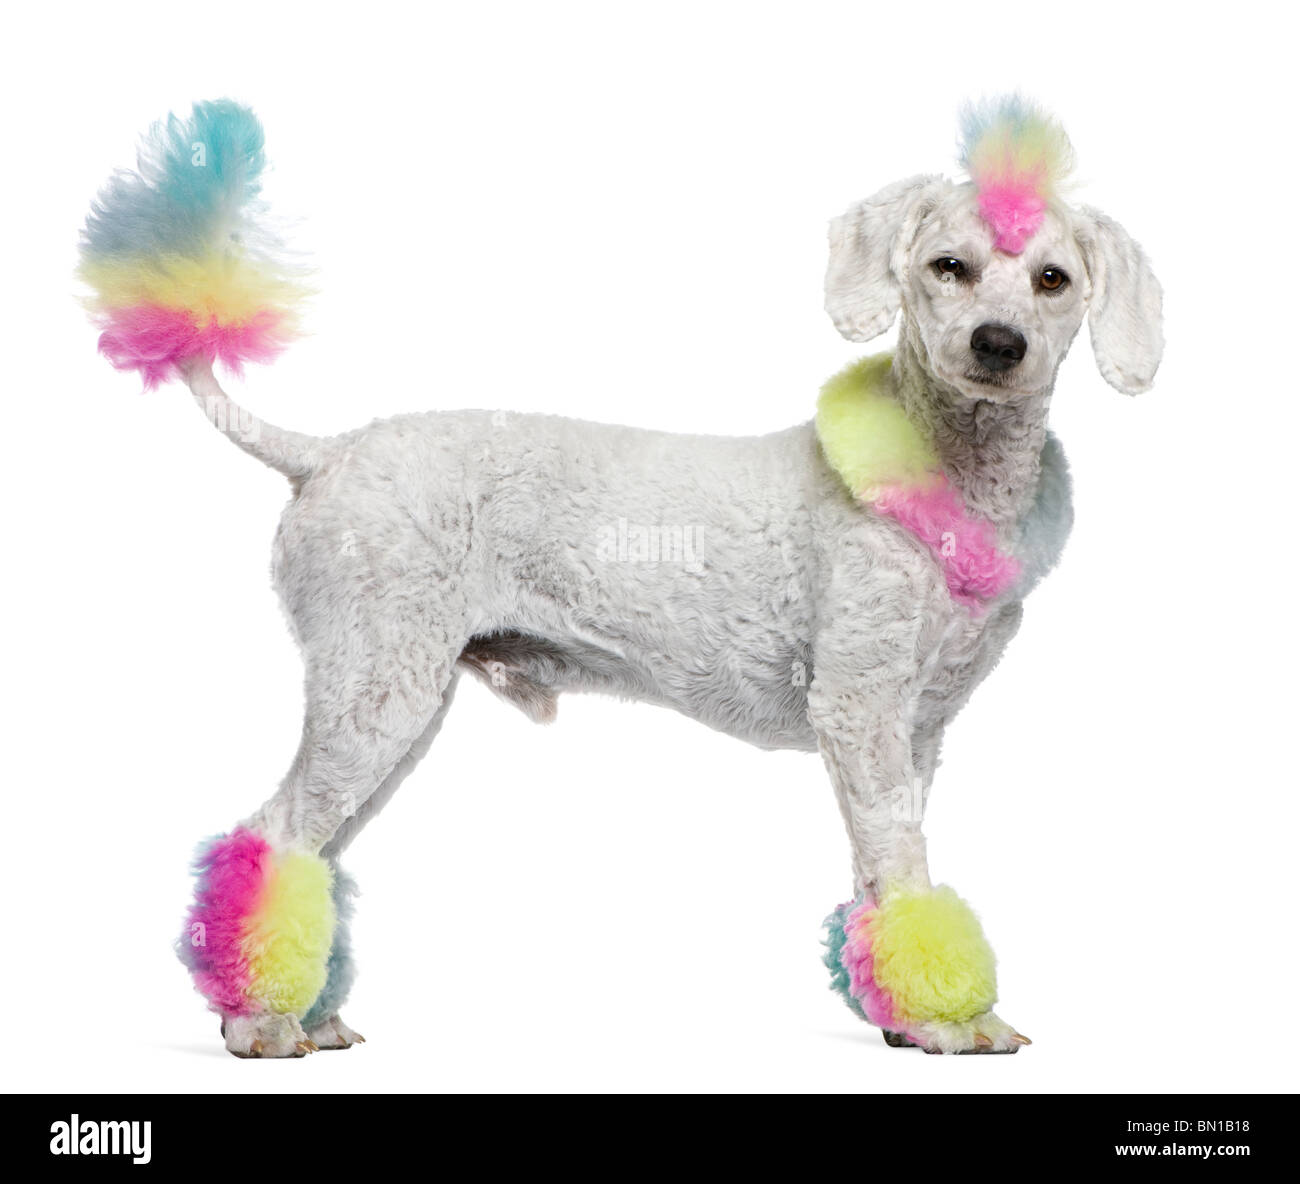 Poodle with multi-colored hair and mohawk, 12 months old, standing in front of white background Stock Photo